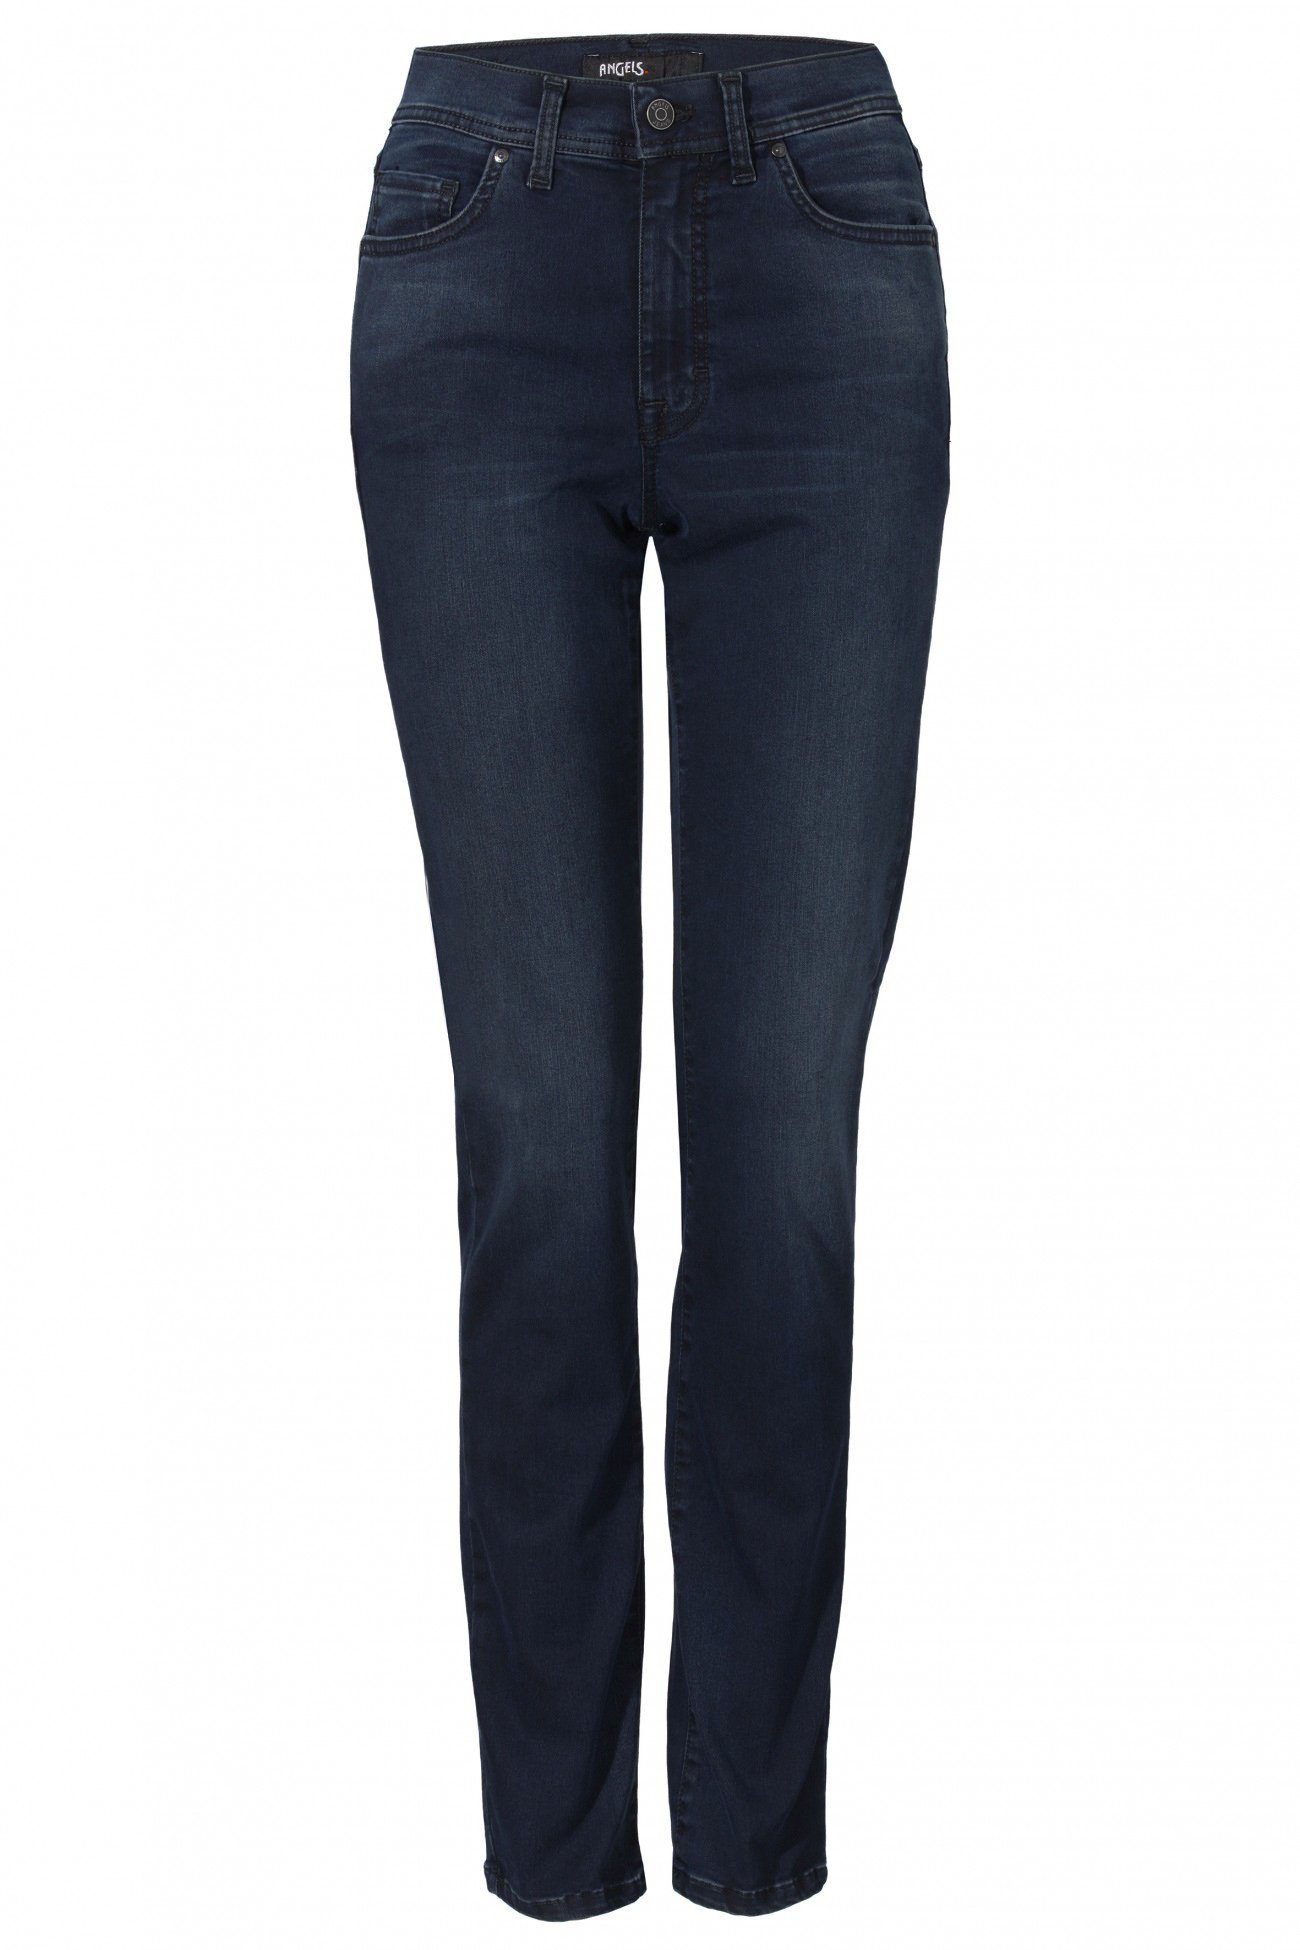 ANGELS Stretch-Jeans ANGELS JEANS CICI night blue 519 34.30 30 night blue | 